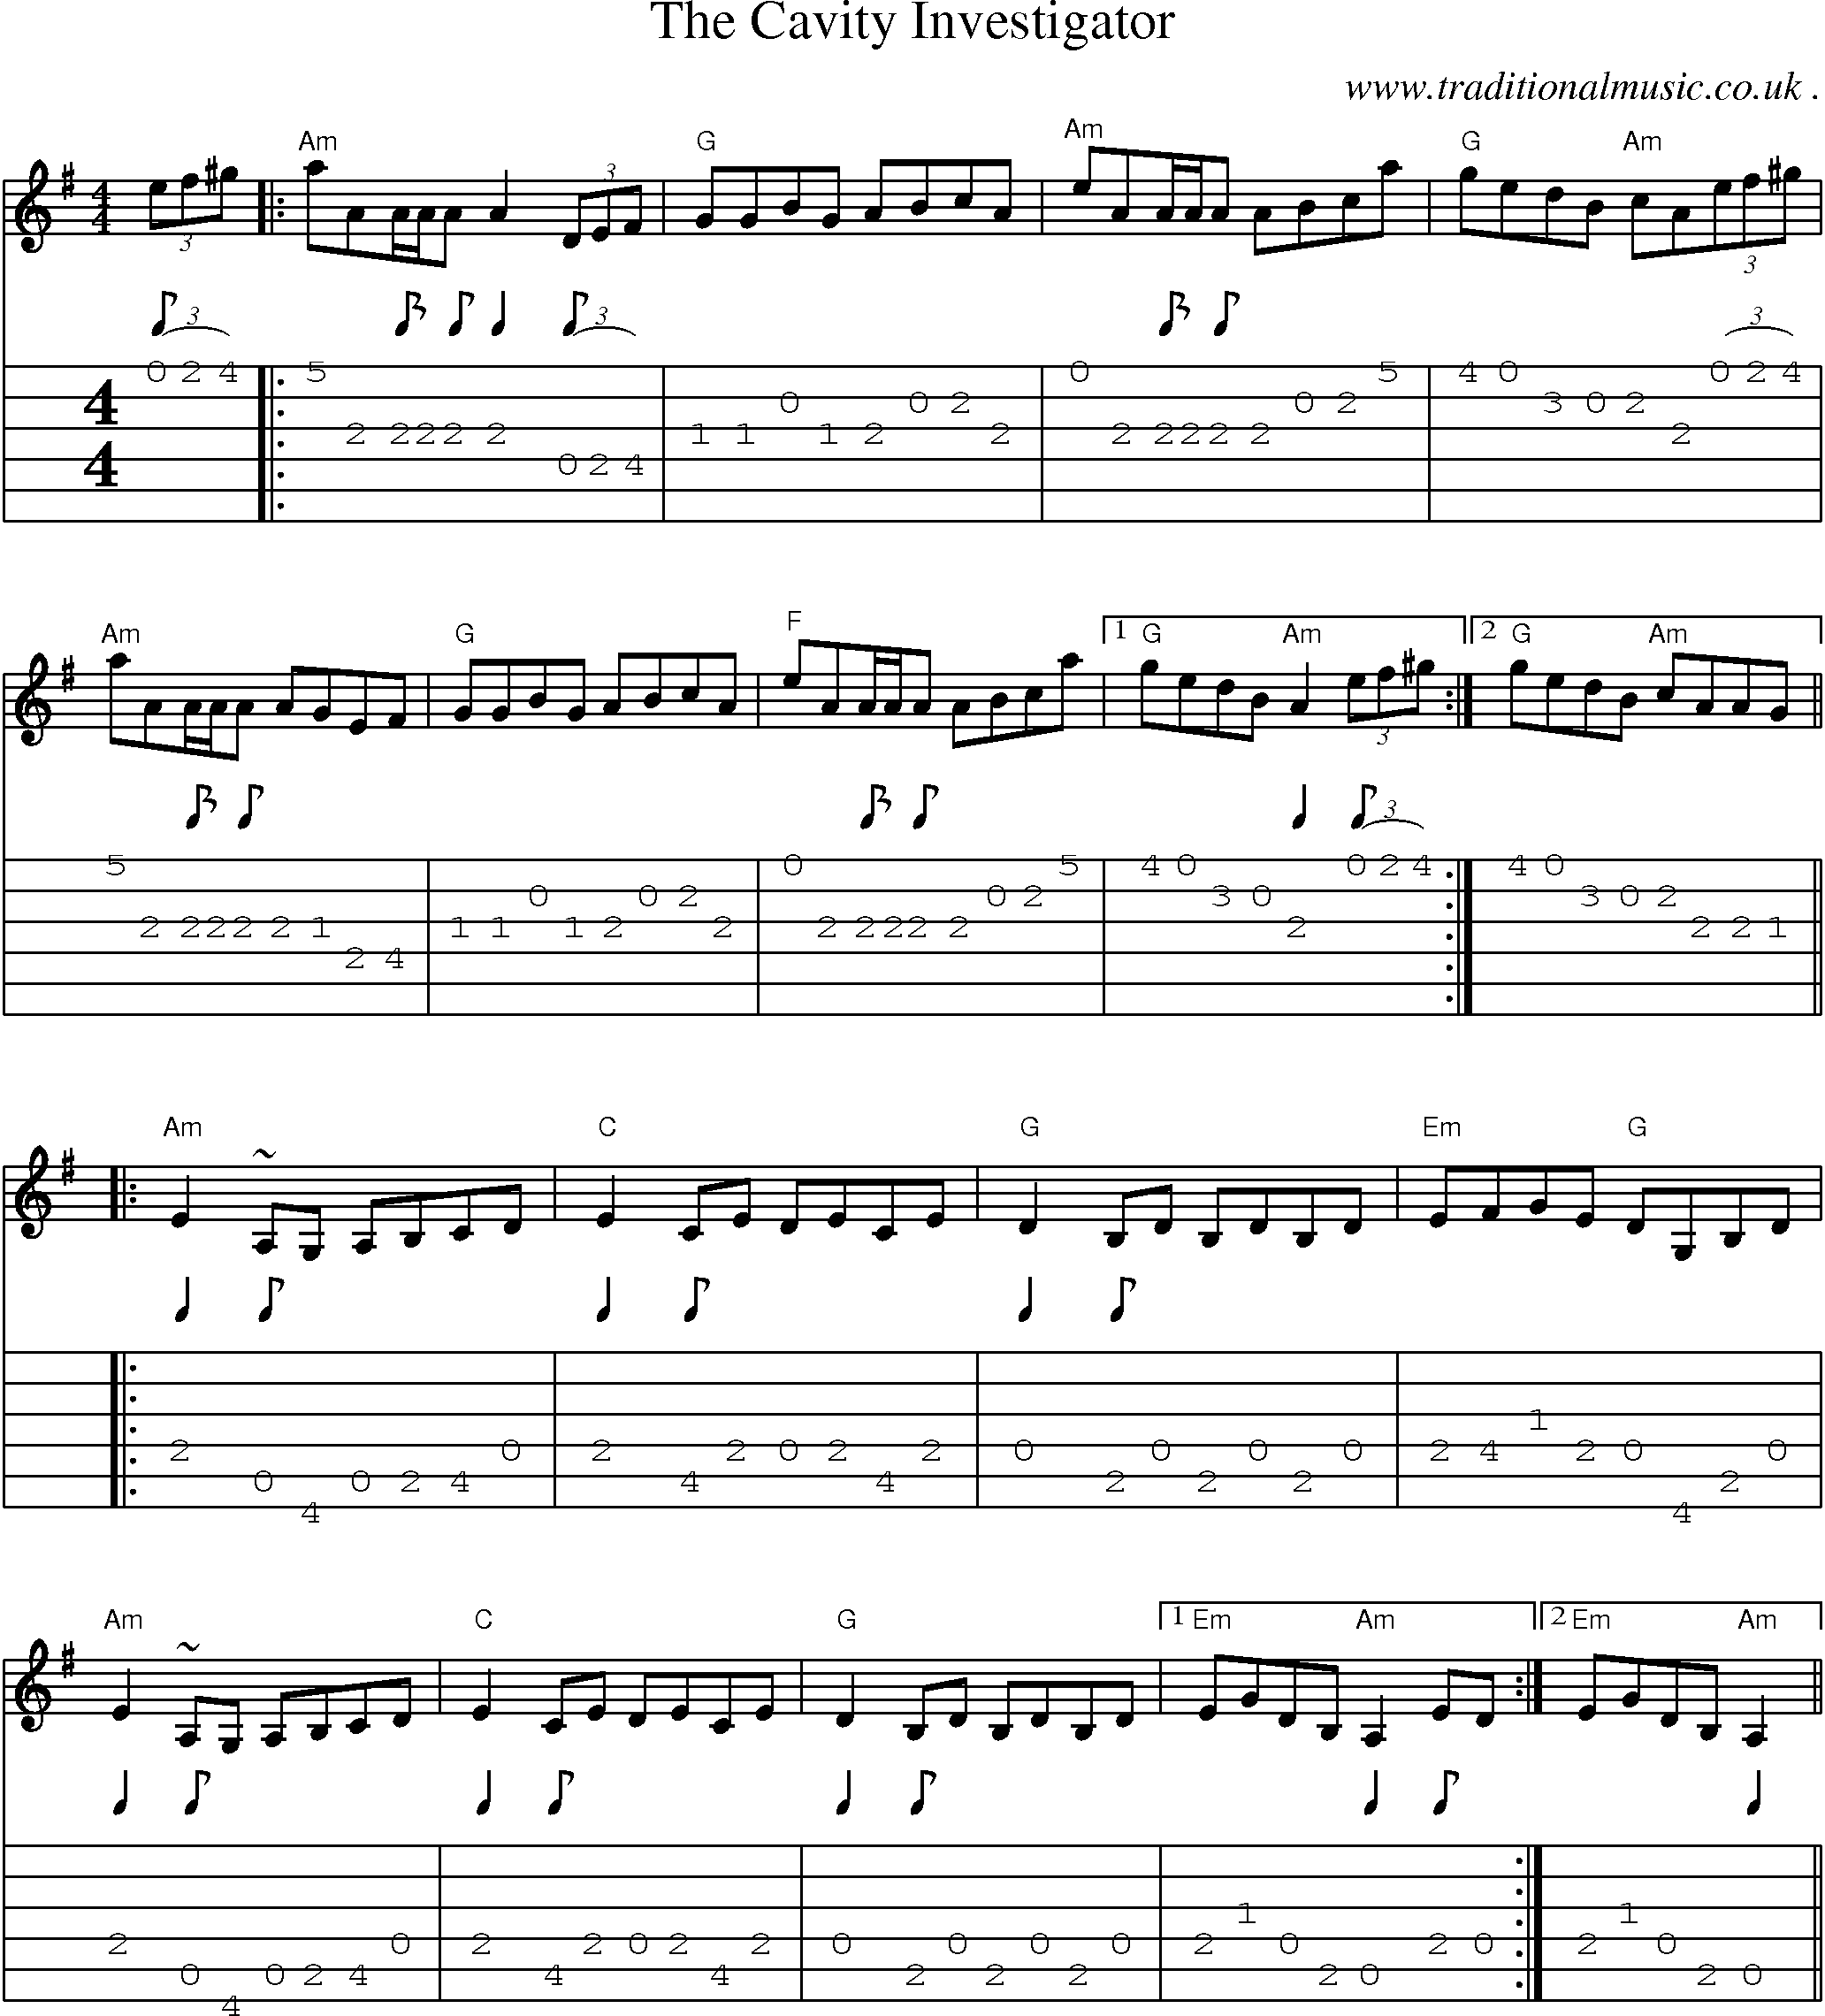 Music Score and Guitar Tabs for The Cavity Investigator